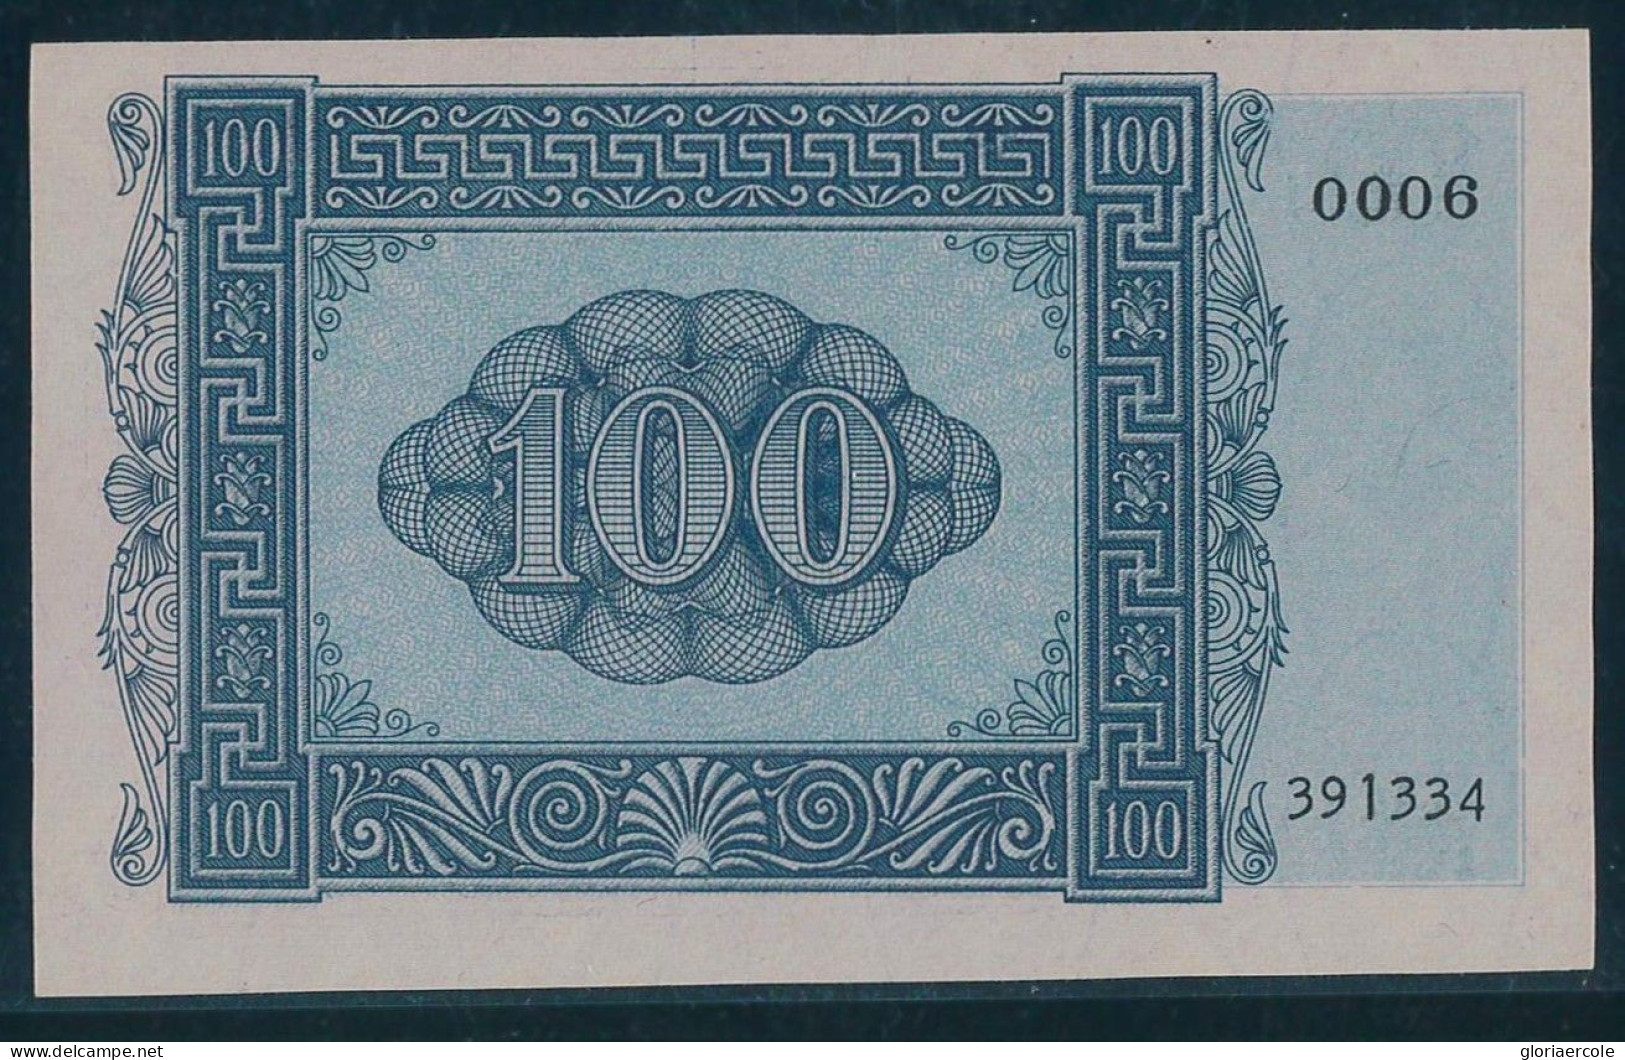 P2732 - ITALIAN OCCUPATION OF THE JONIAN ISLANDS 100 DRACHMA UNC. CONSECUTIVE NUMBER!!!!!!!!!!! ITALIAQN CAT. OL 91 - Andere - Europa